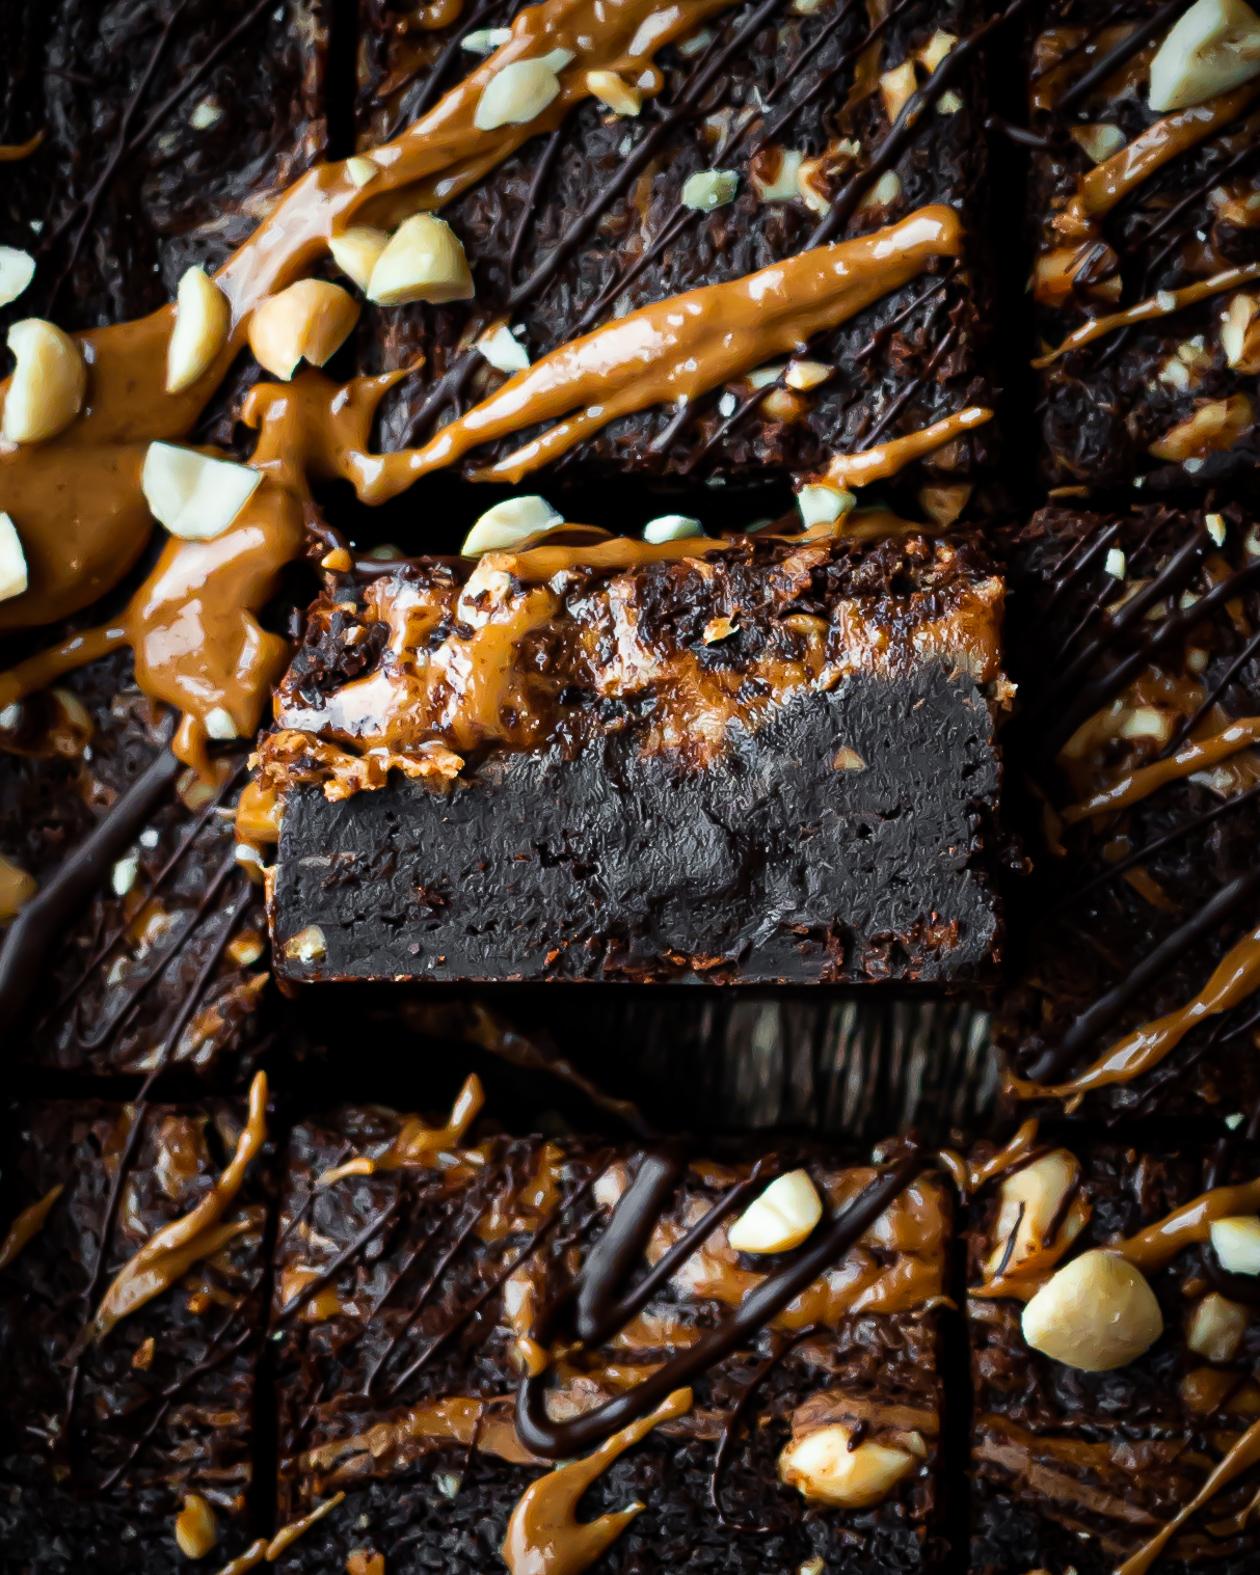 peanut butter and chocolate brownies, one brownie on its side showing thickness and density of brownies, topped with peanut butter, melted dark chocolate and crushed peanuts